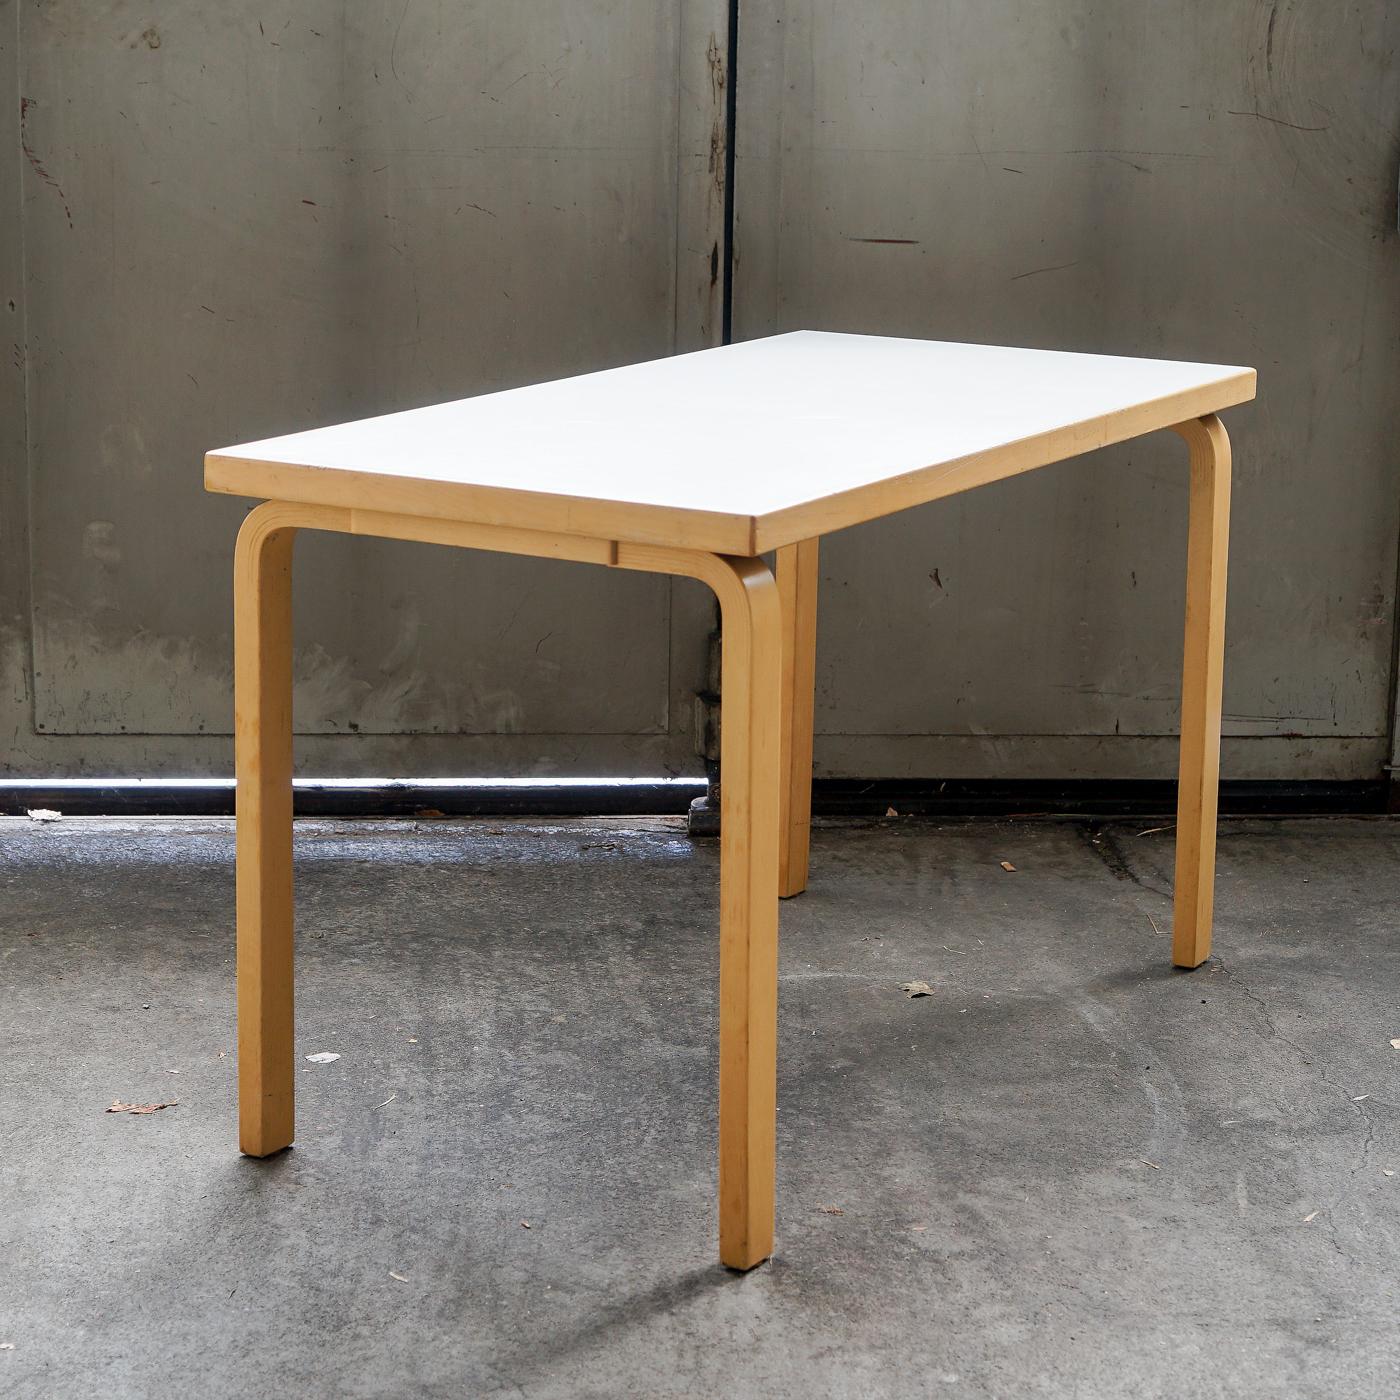 This original table, model 80A was designed by Alvar Aalto in 1935 for Artek, Finland. It is one piece of the famous L-leg-collection and is made of finish birchwood. The legs are bended in a special developed technique. The 4cm tabletop is veneered